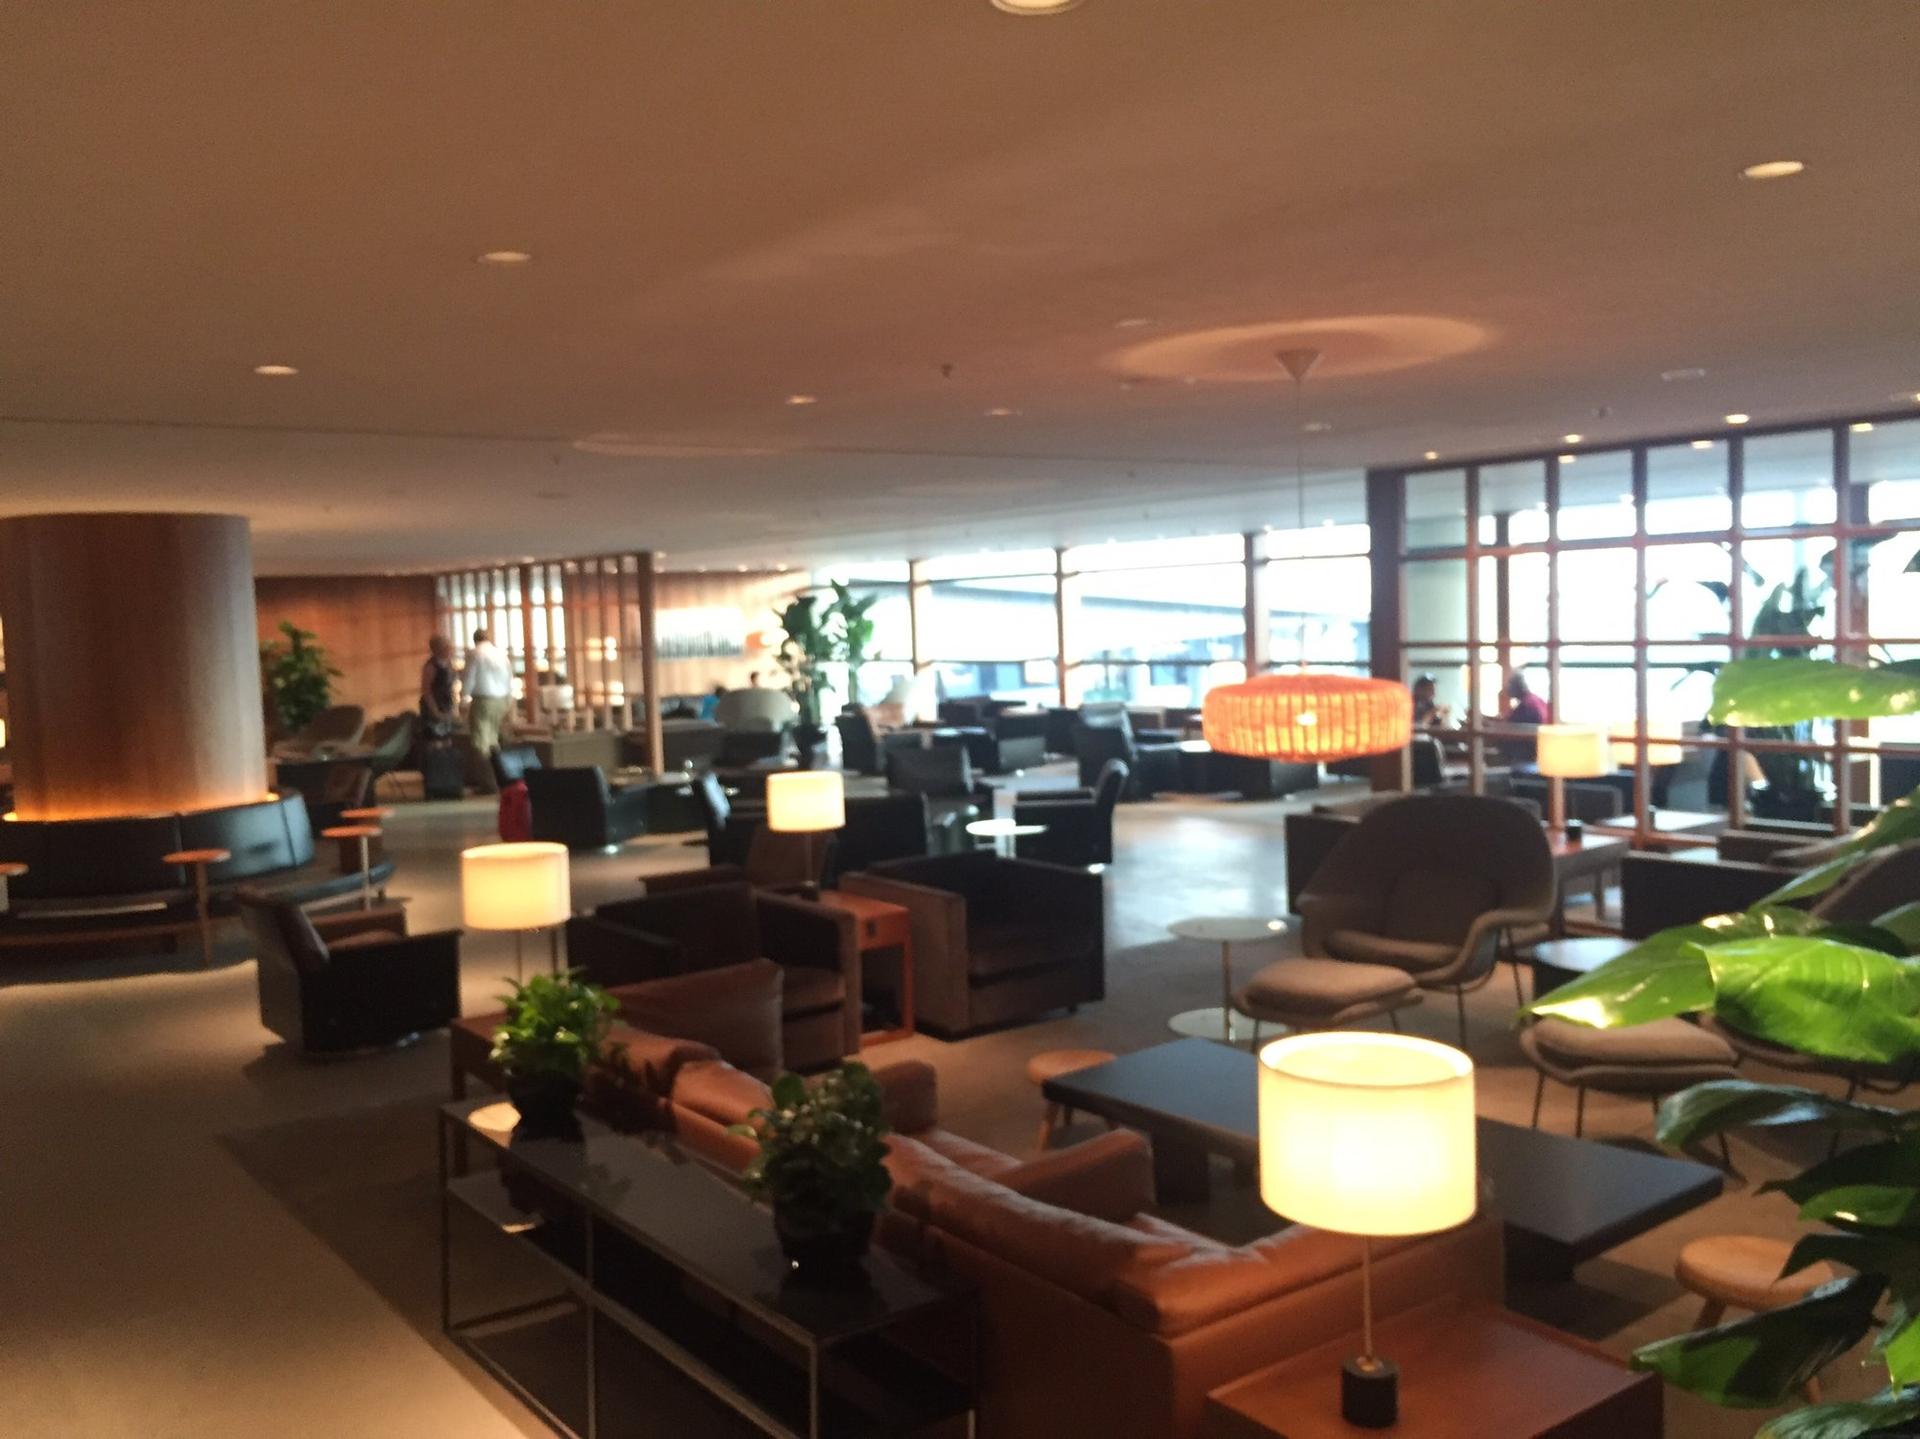 Cathay Pacific The Pier Business Class Lounge image 19 of 61